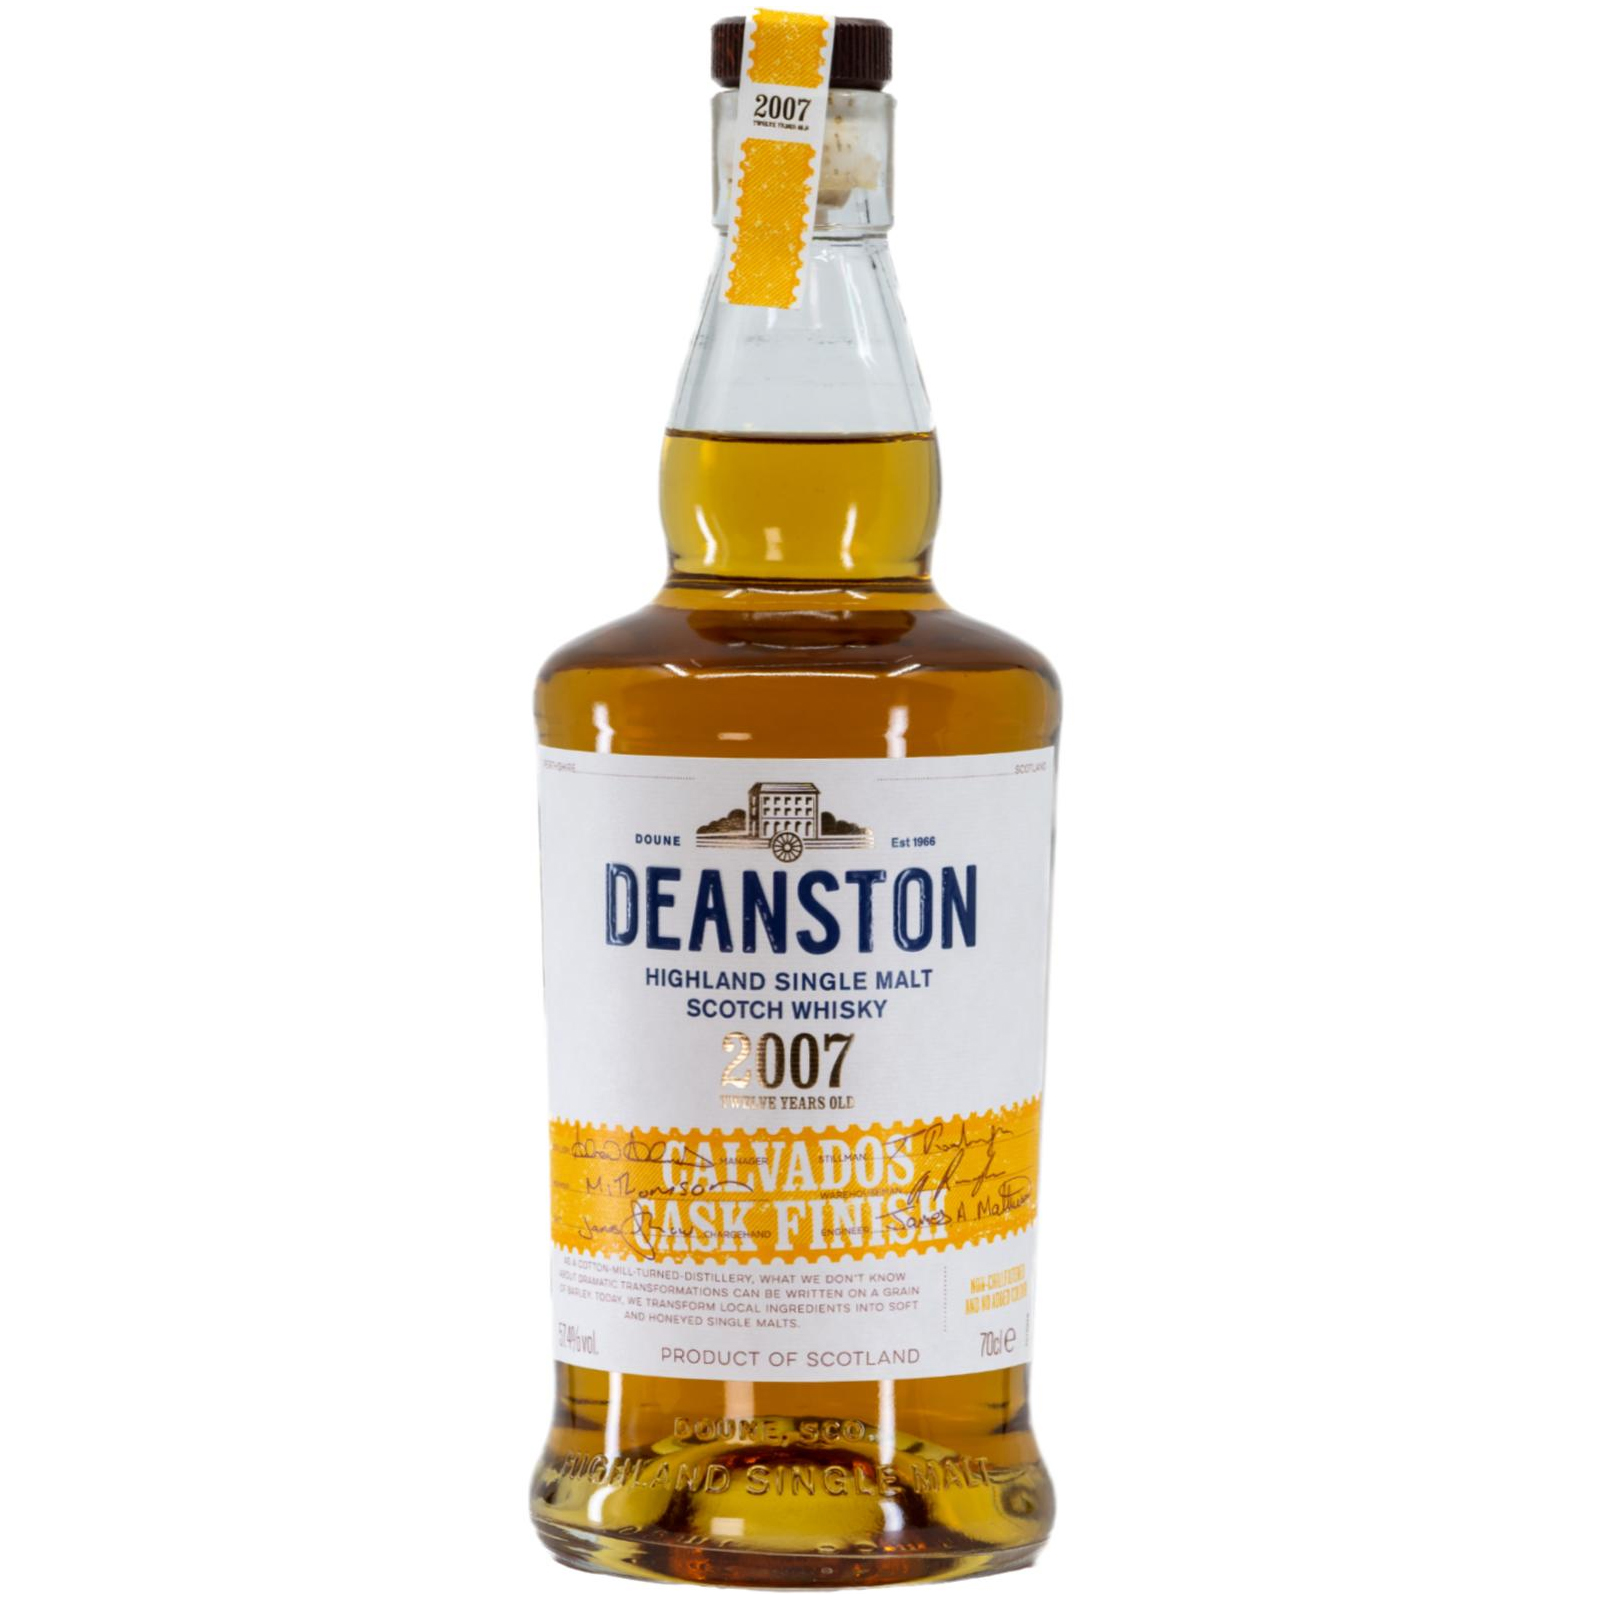 You are currently viewing Deanston 2007 12 years – Calvados cask finish